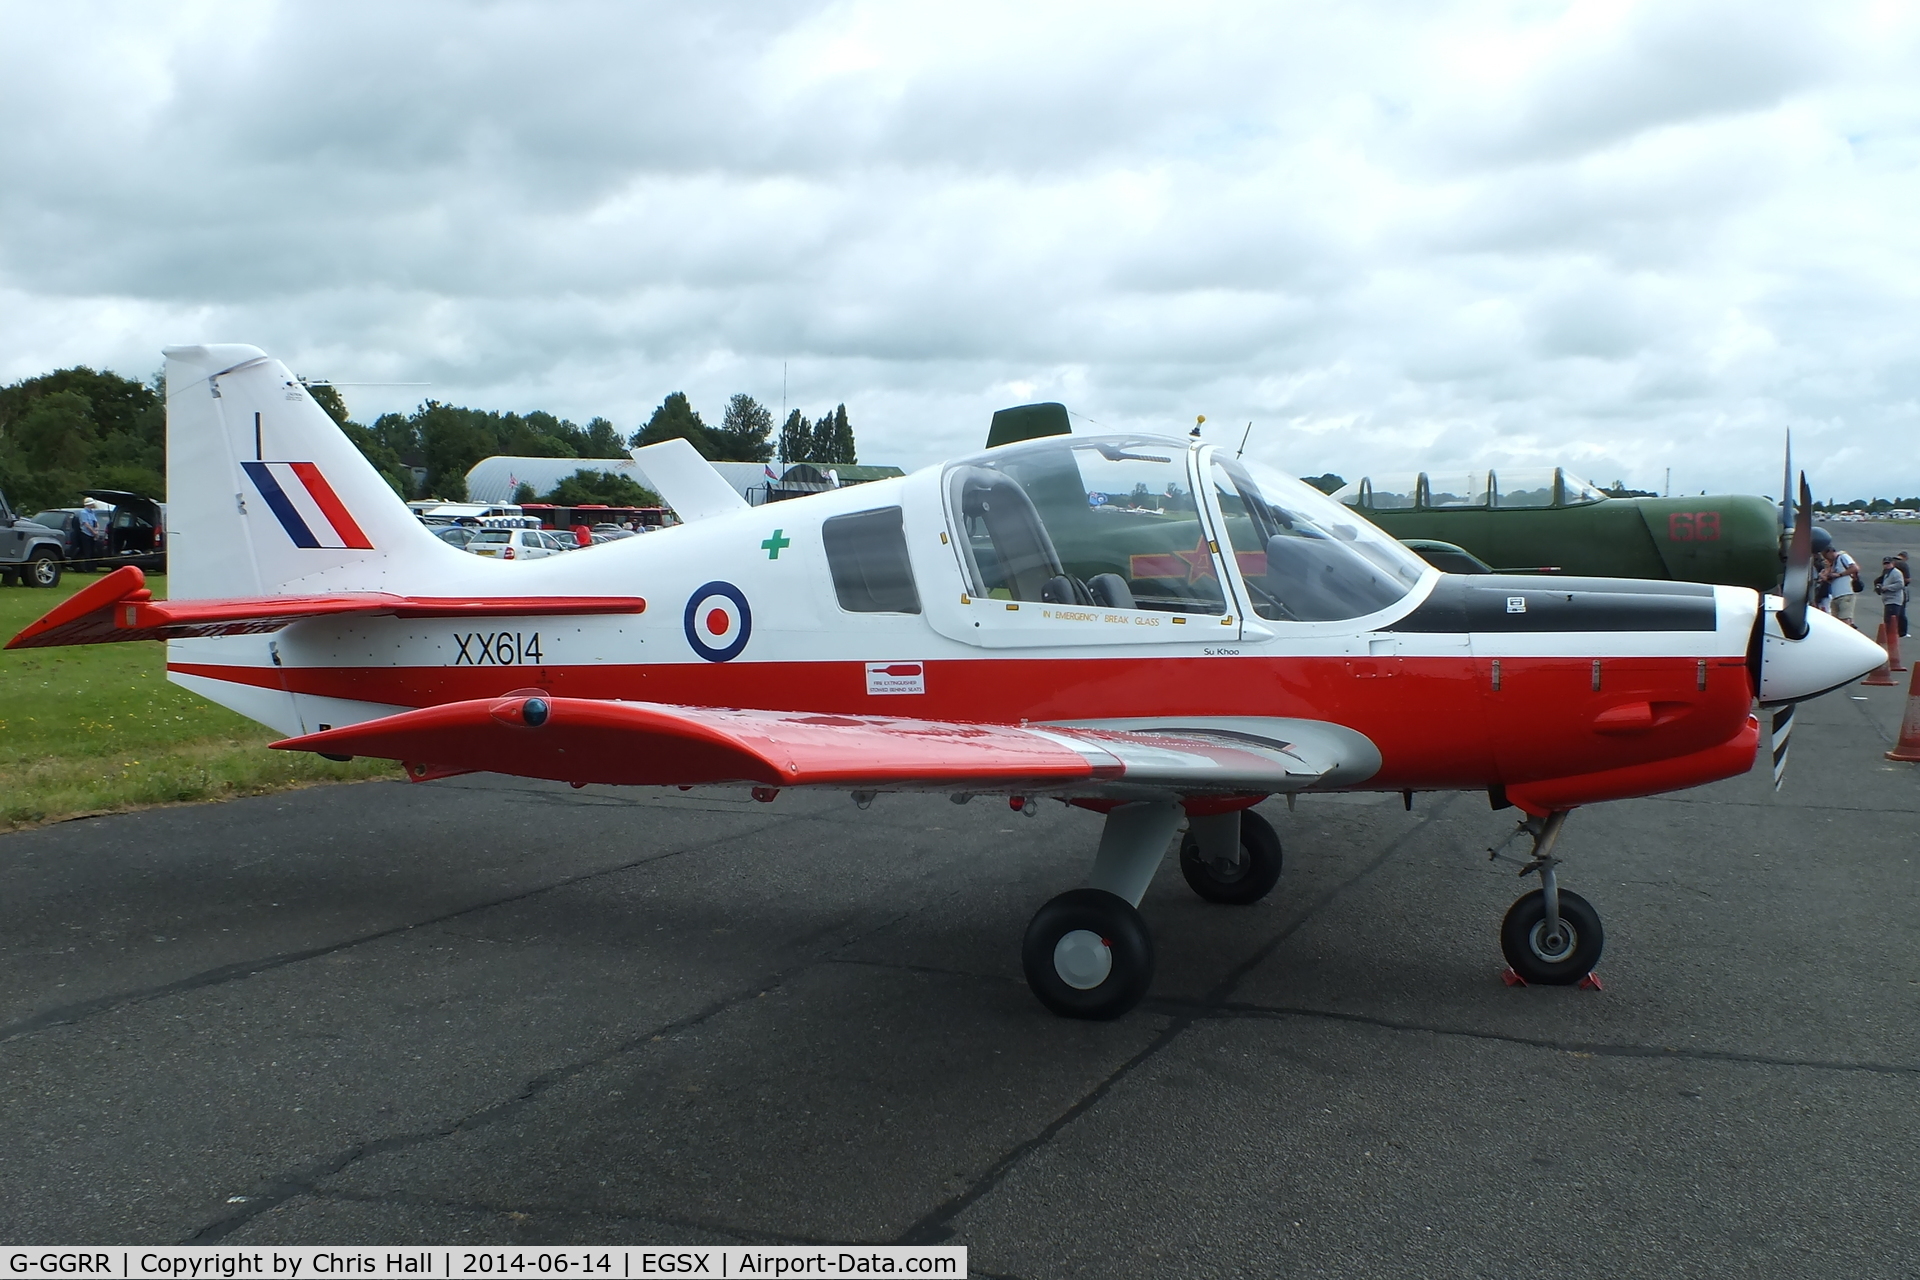 G-GGRR, 1974 Scottish Aviation Bulldog T.1 C/N BH120/272, at the Air Britain fly in